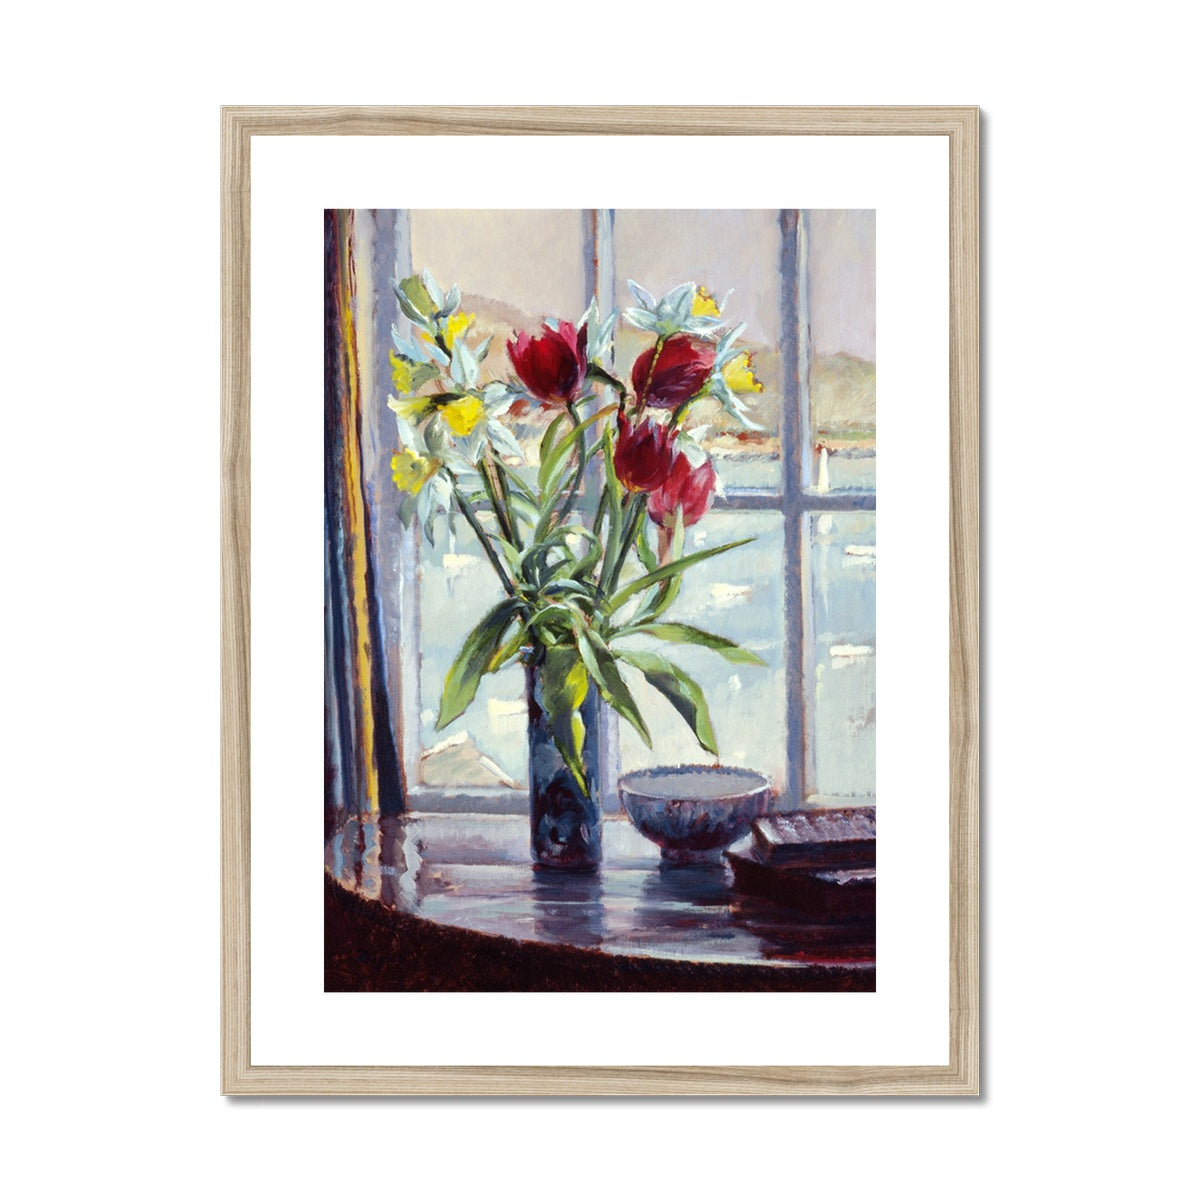 Ted Dyer Framed Open Edition Cornish Fine Art Print. &#39;Daffodils and Tulips in a Vase, Still Life&#39;. Cornwall Art Gallery